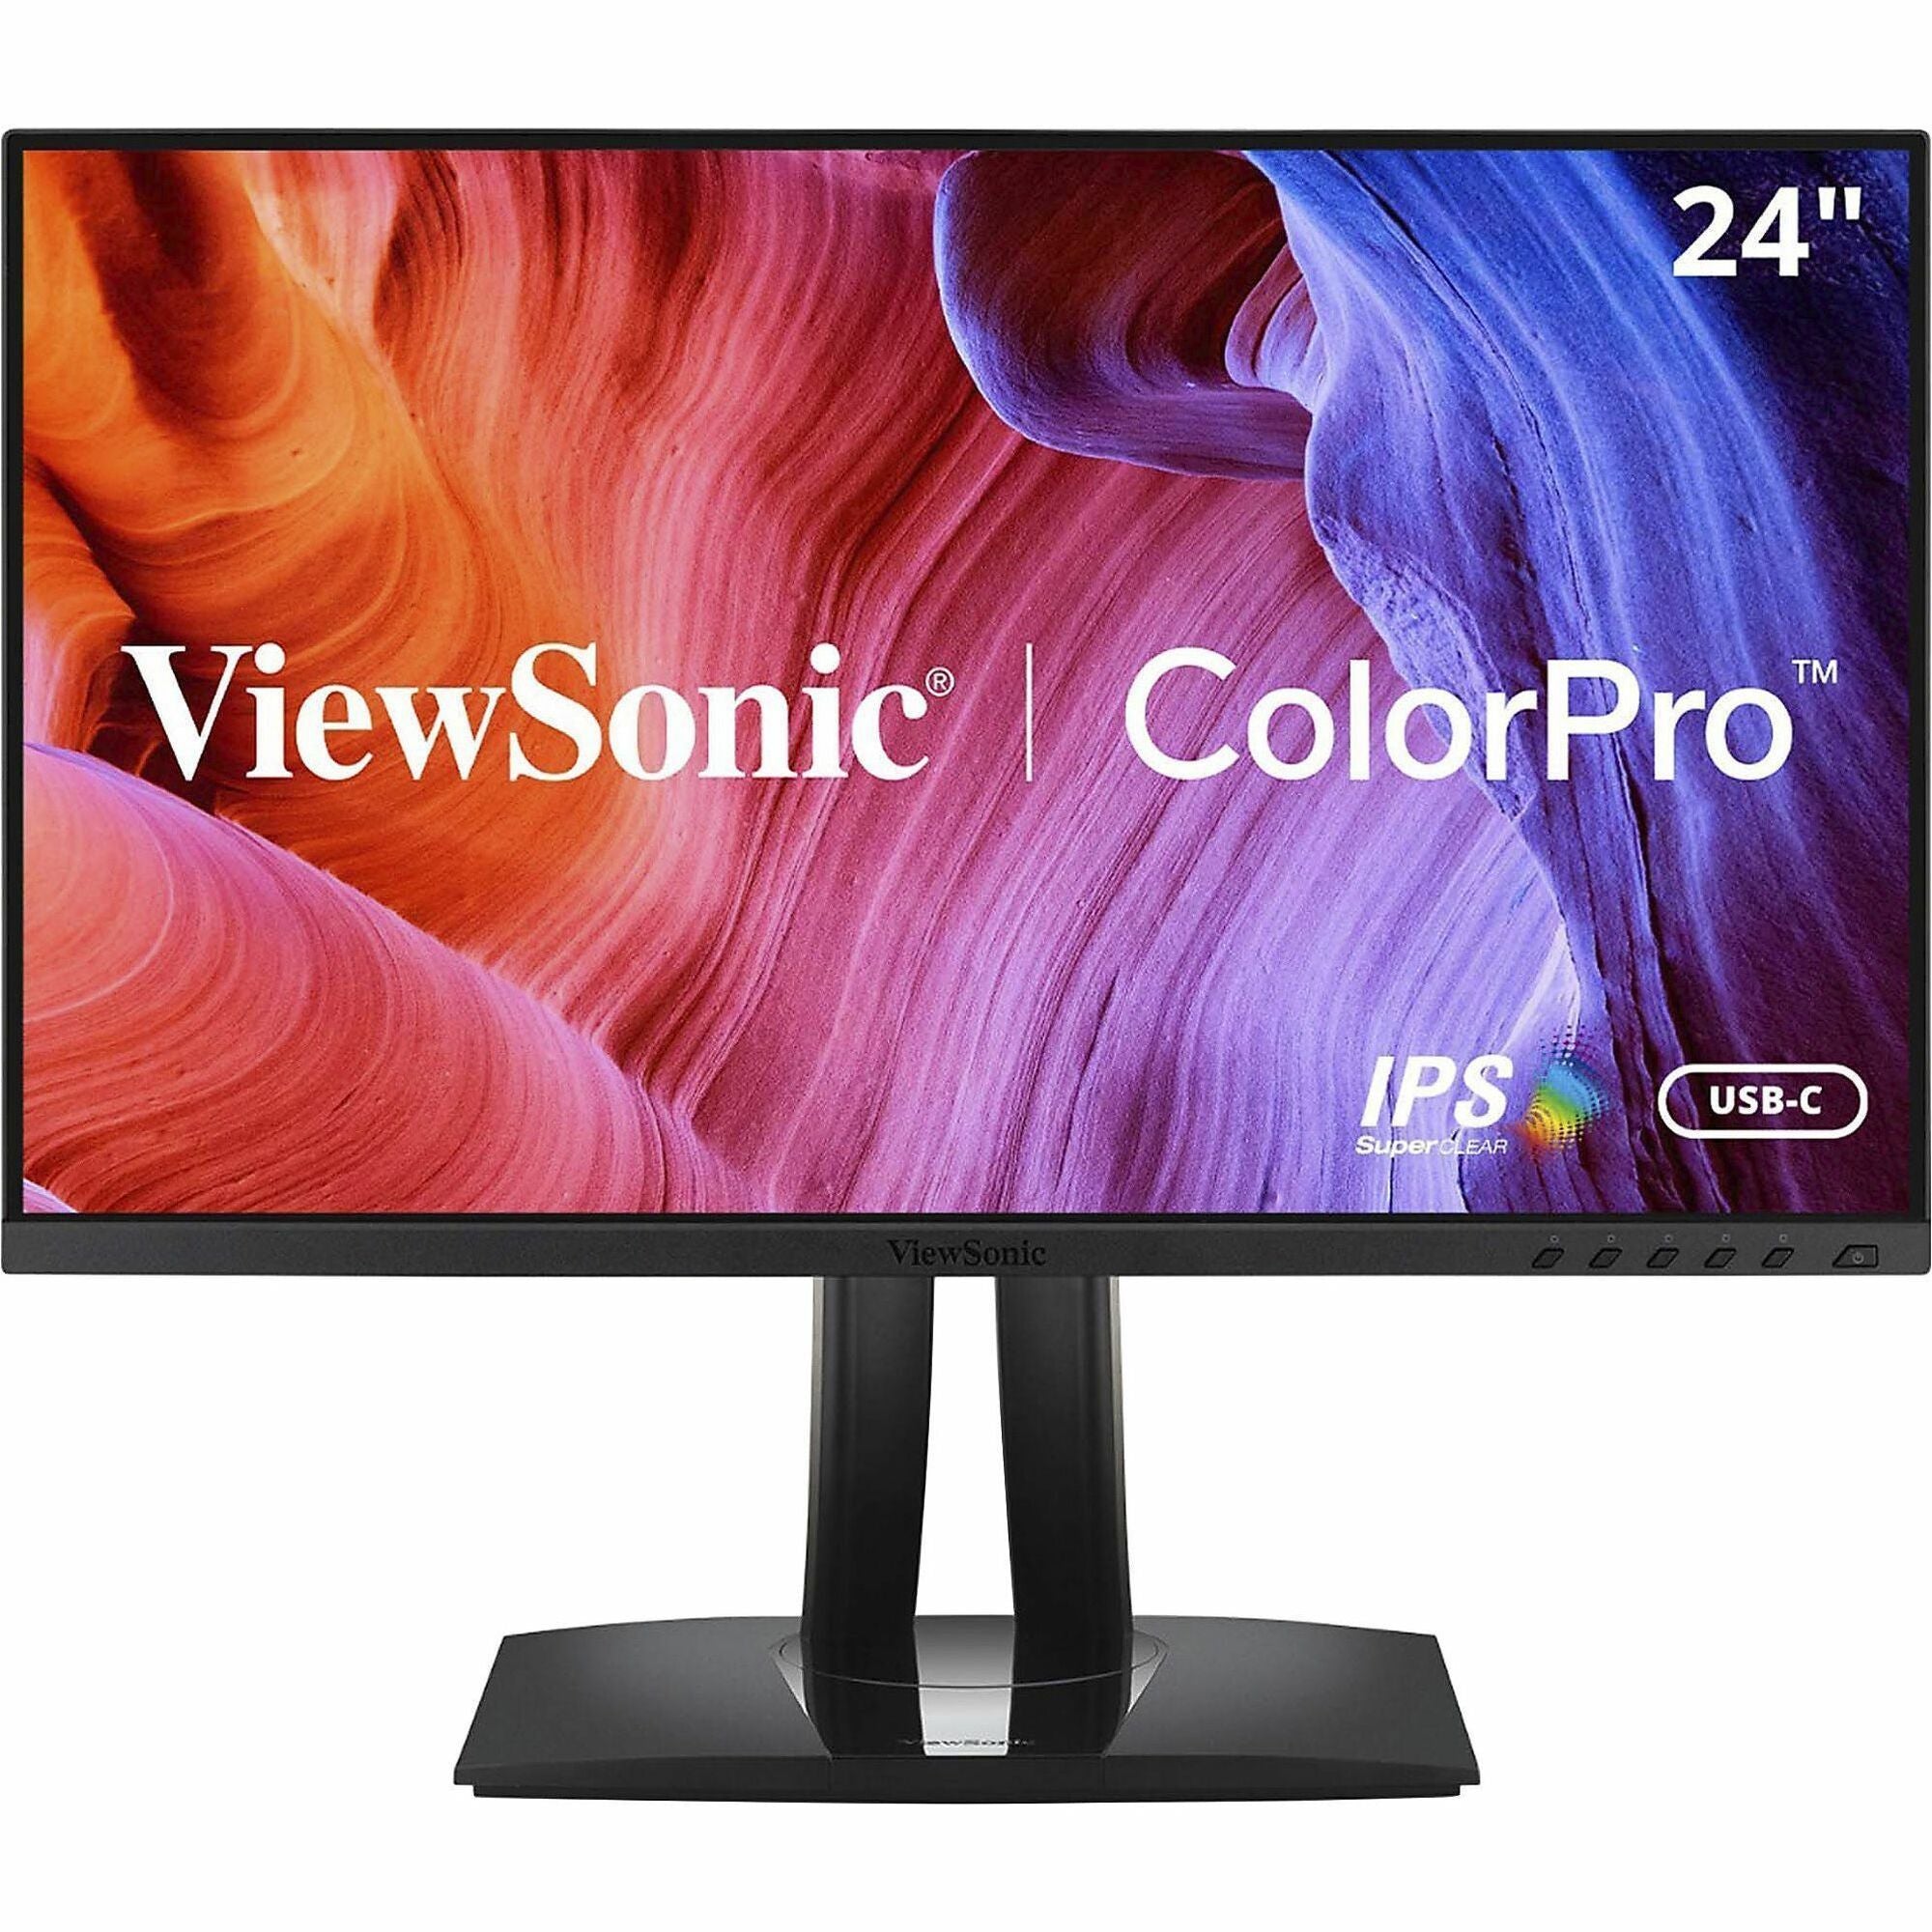 viewsonic-vp2456-24-inch-1080p-premium-ips-monitor-with-ultra-thin-bezels-color-accuracy-pantone-validated-hdmi-displayport-and-usb-c-for-professional-home-and-office-colorpro-vp2456-1080p-ergonomic-ips-monitor-with-pantone-validated-usb-c_vewvp2456 - 1